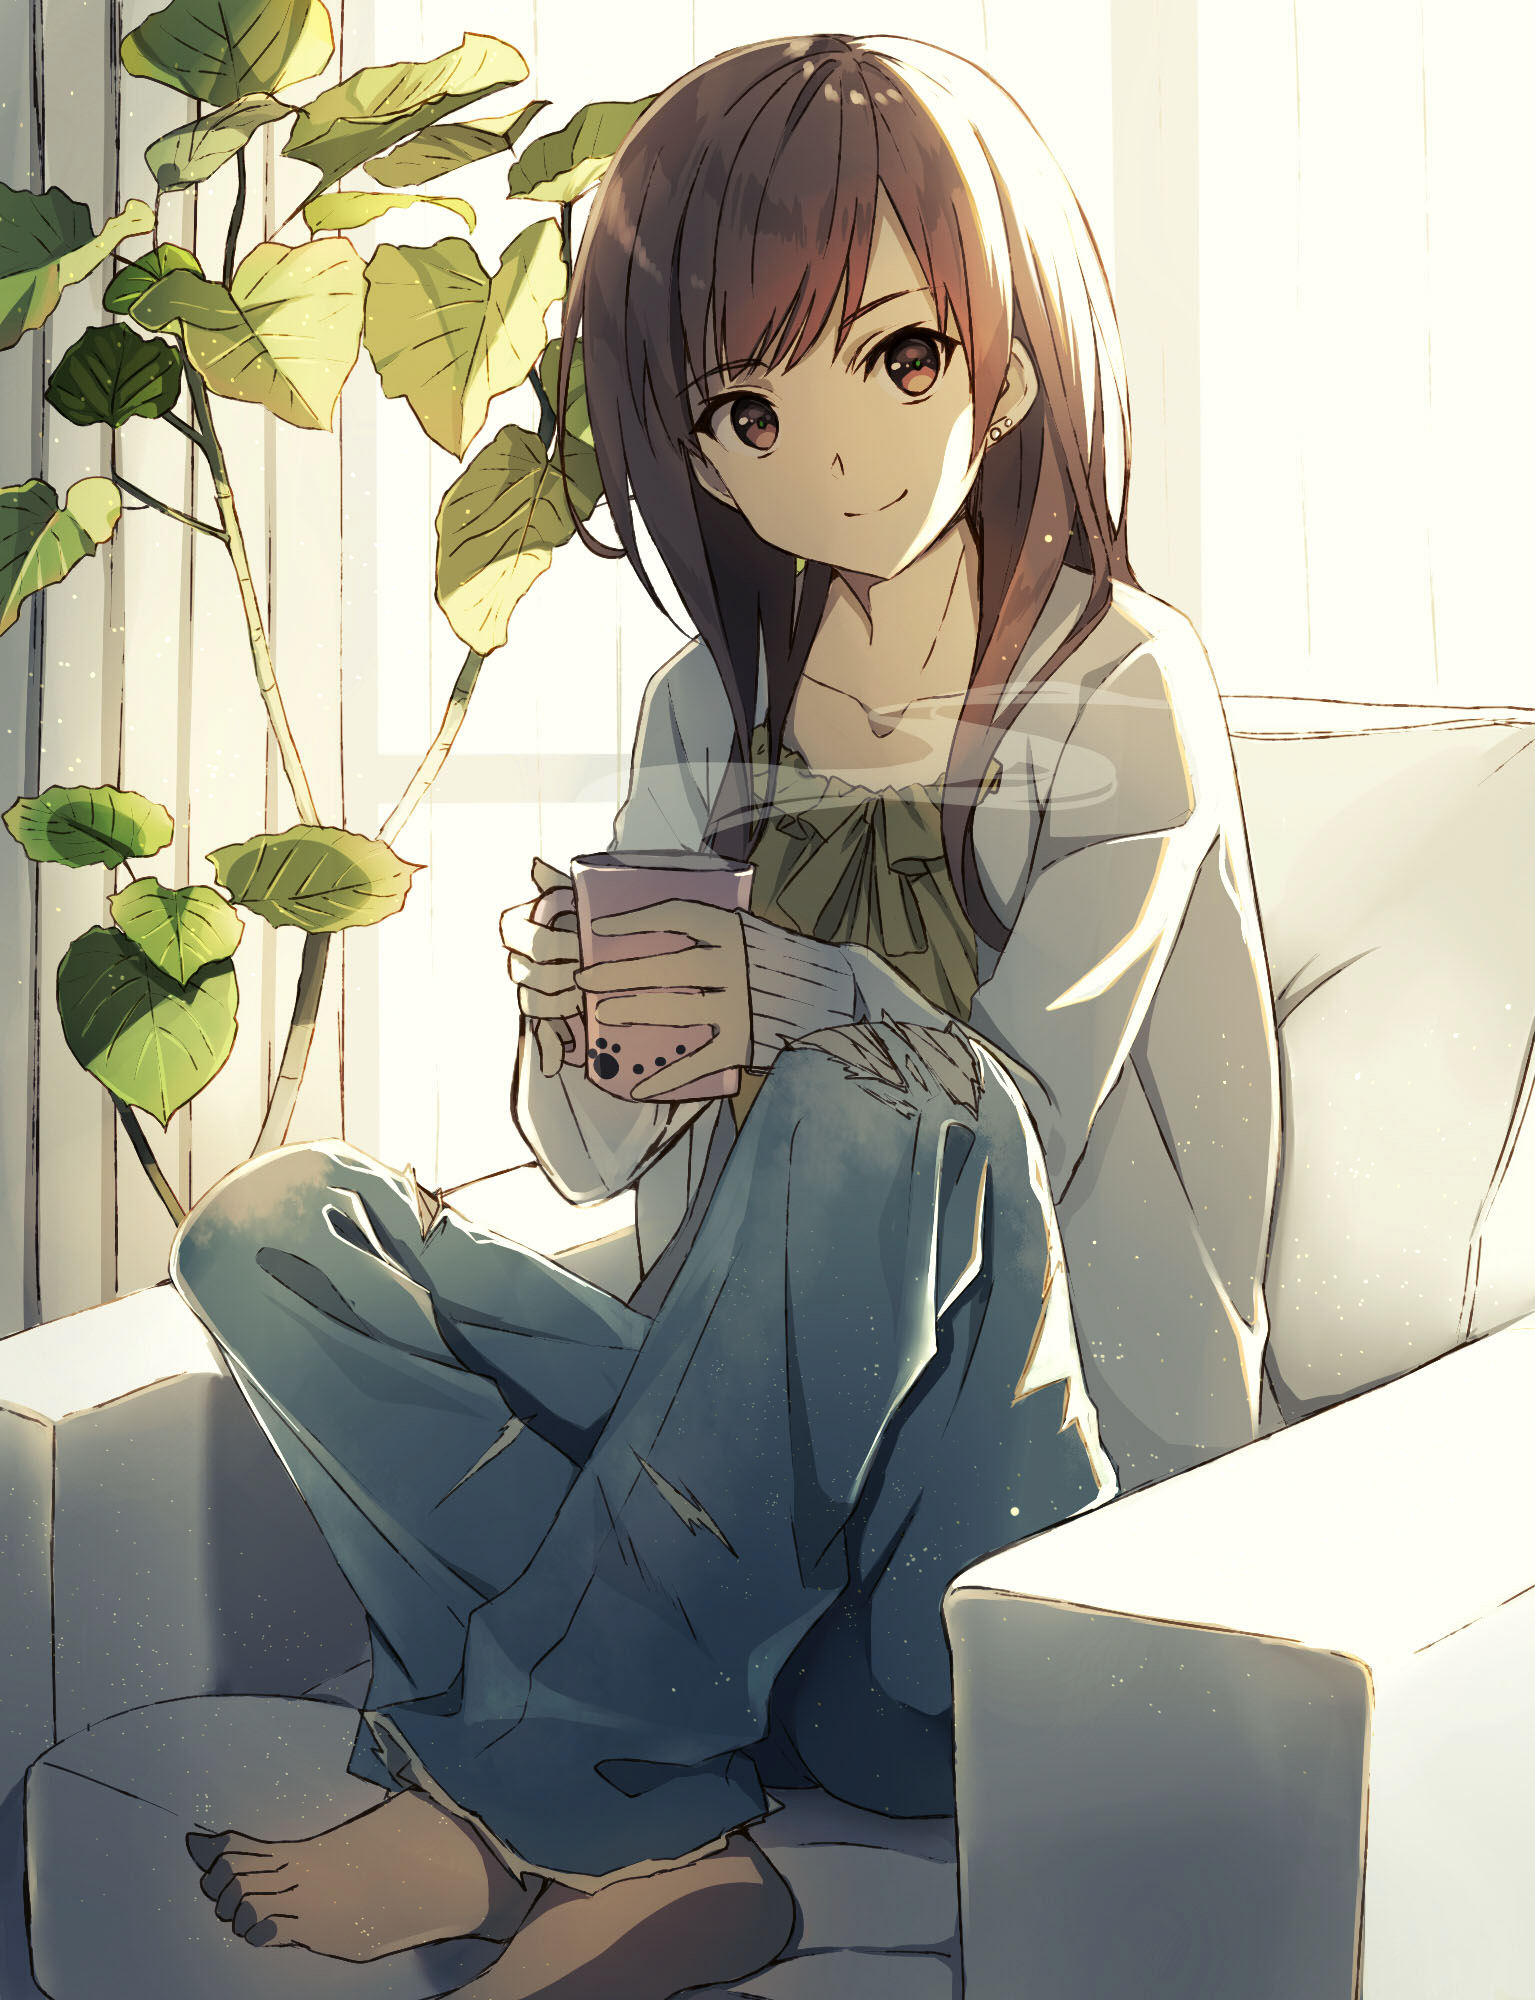 Anime 1535x2000 anime girls sitting barefoot jeans torn jeans cup brunette brown eyes smiling Akami Fumio